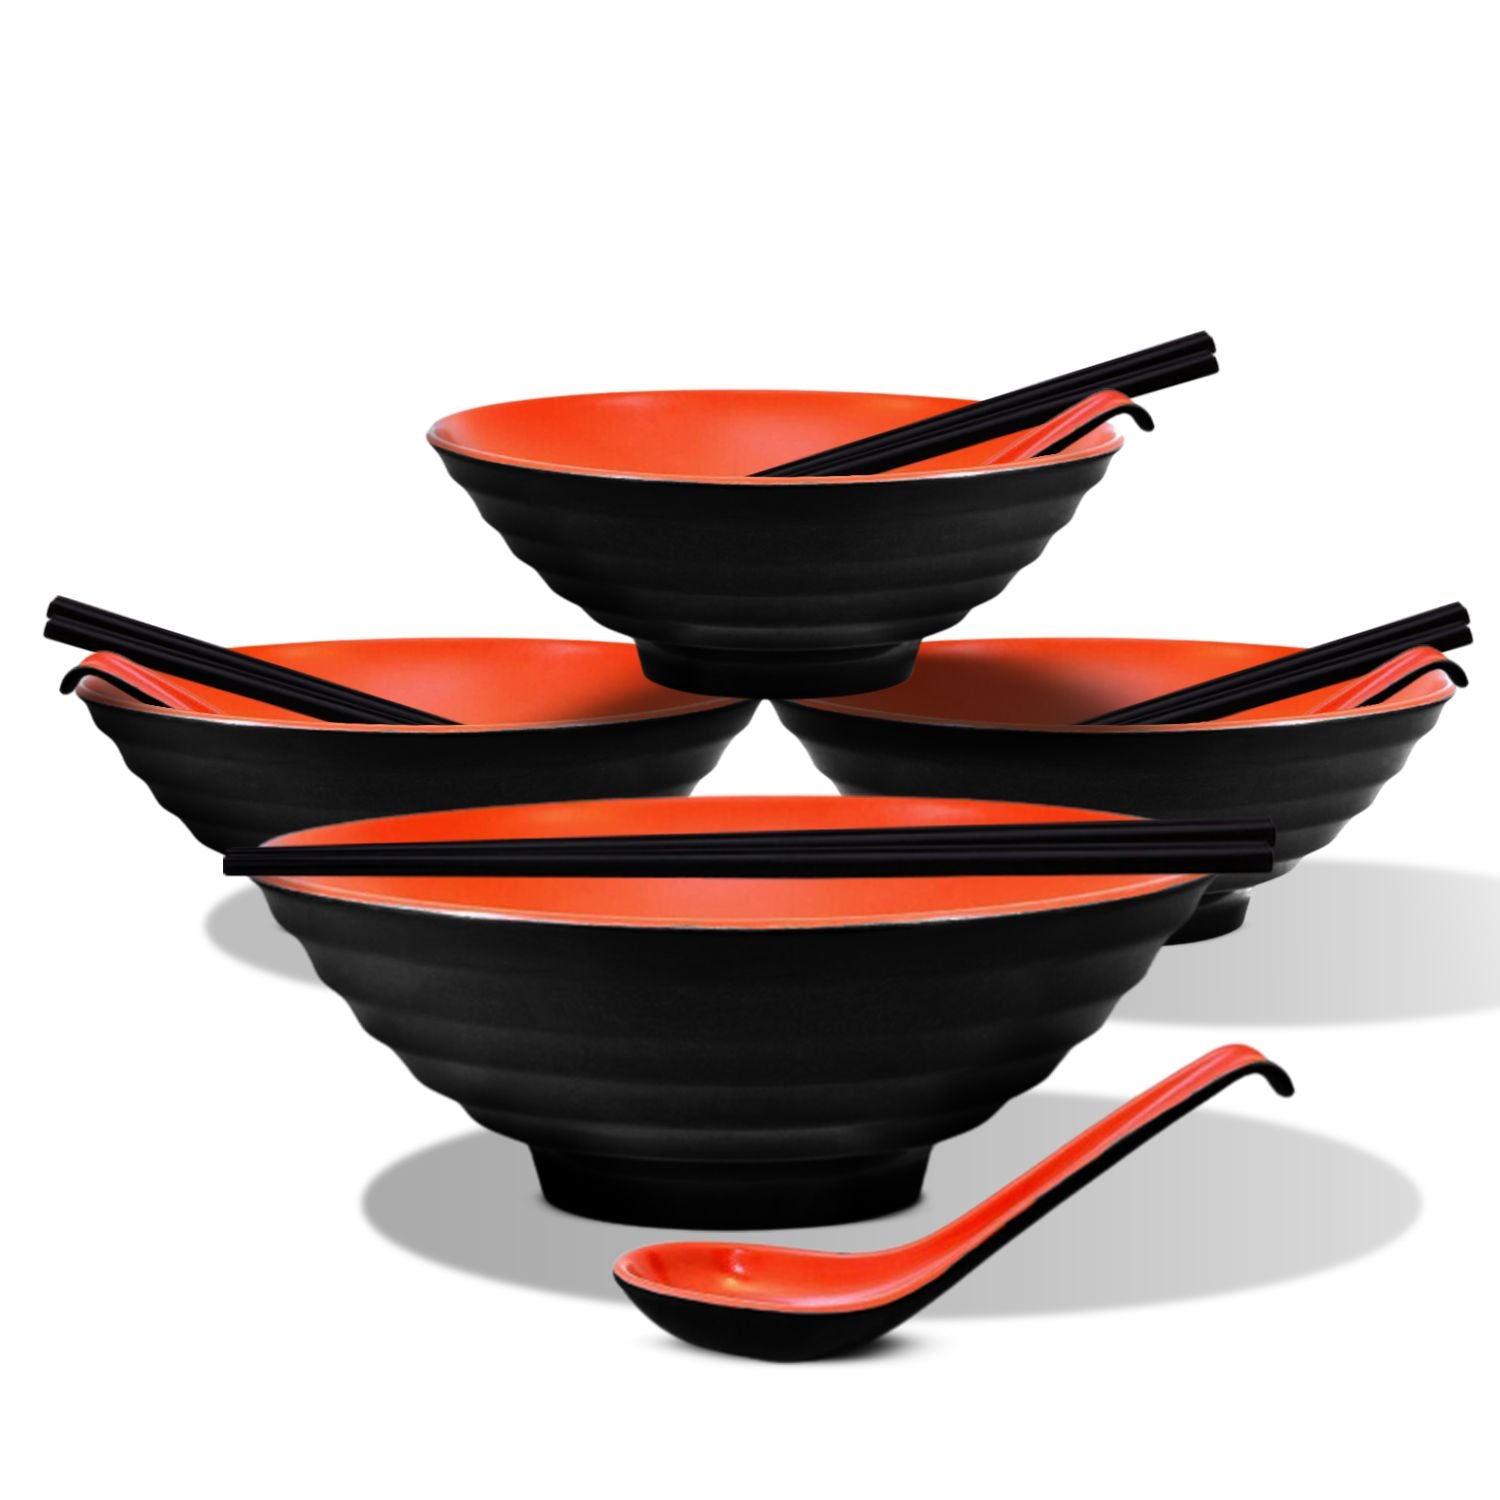 GOMINIMO 4 Sets (12 Piece) Noodle Soup Bowl Dishware with Matching Spoon and Chopsticks (Red and Black)